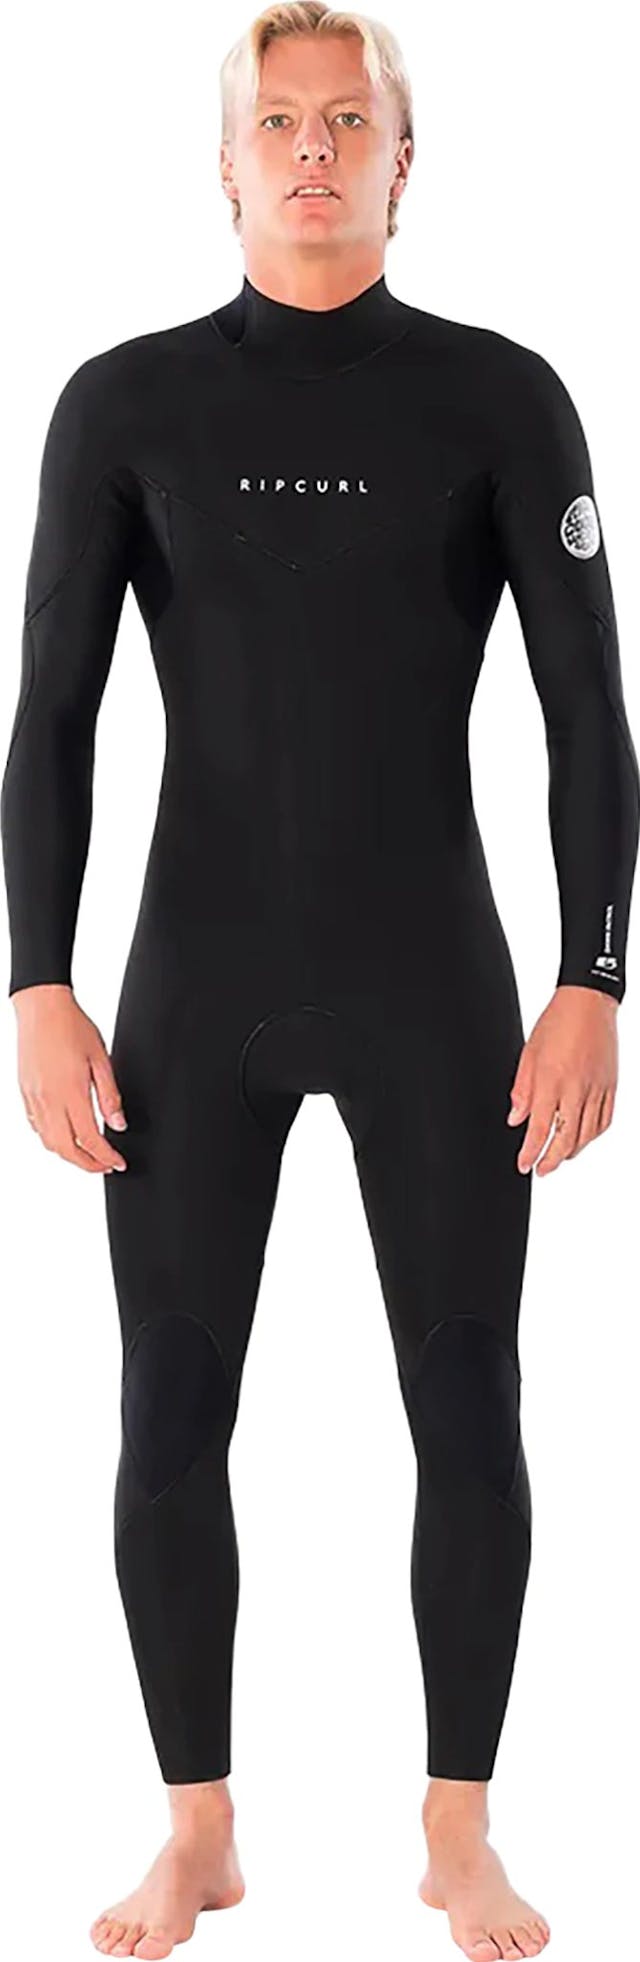 Product image for Dawn Patrol 3/2 Wetsuit - Men's